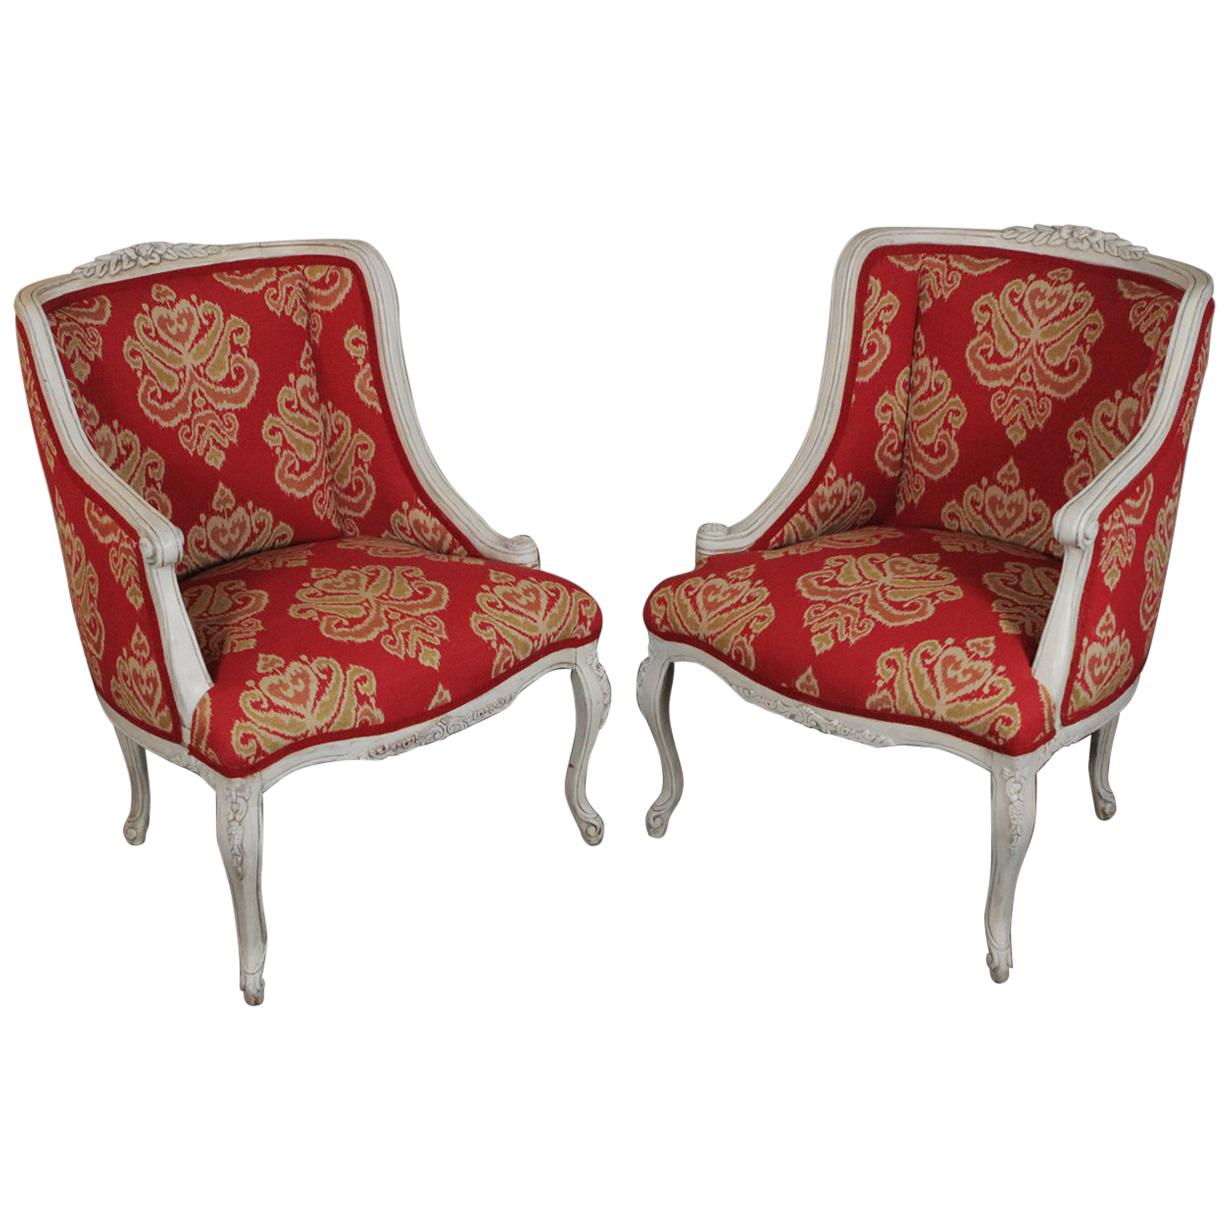 Pair of European Asymmetrical Style Accent Chairs with New Red and White Fabric